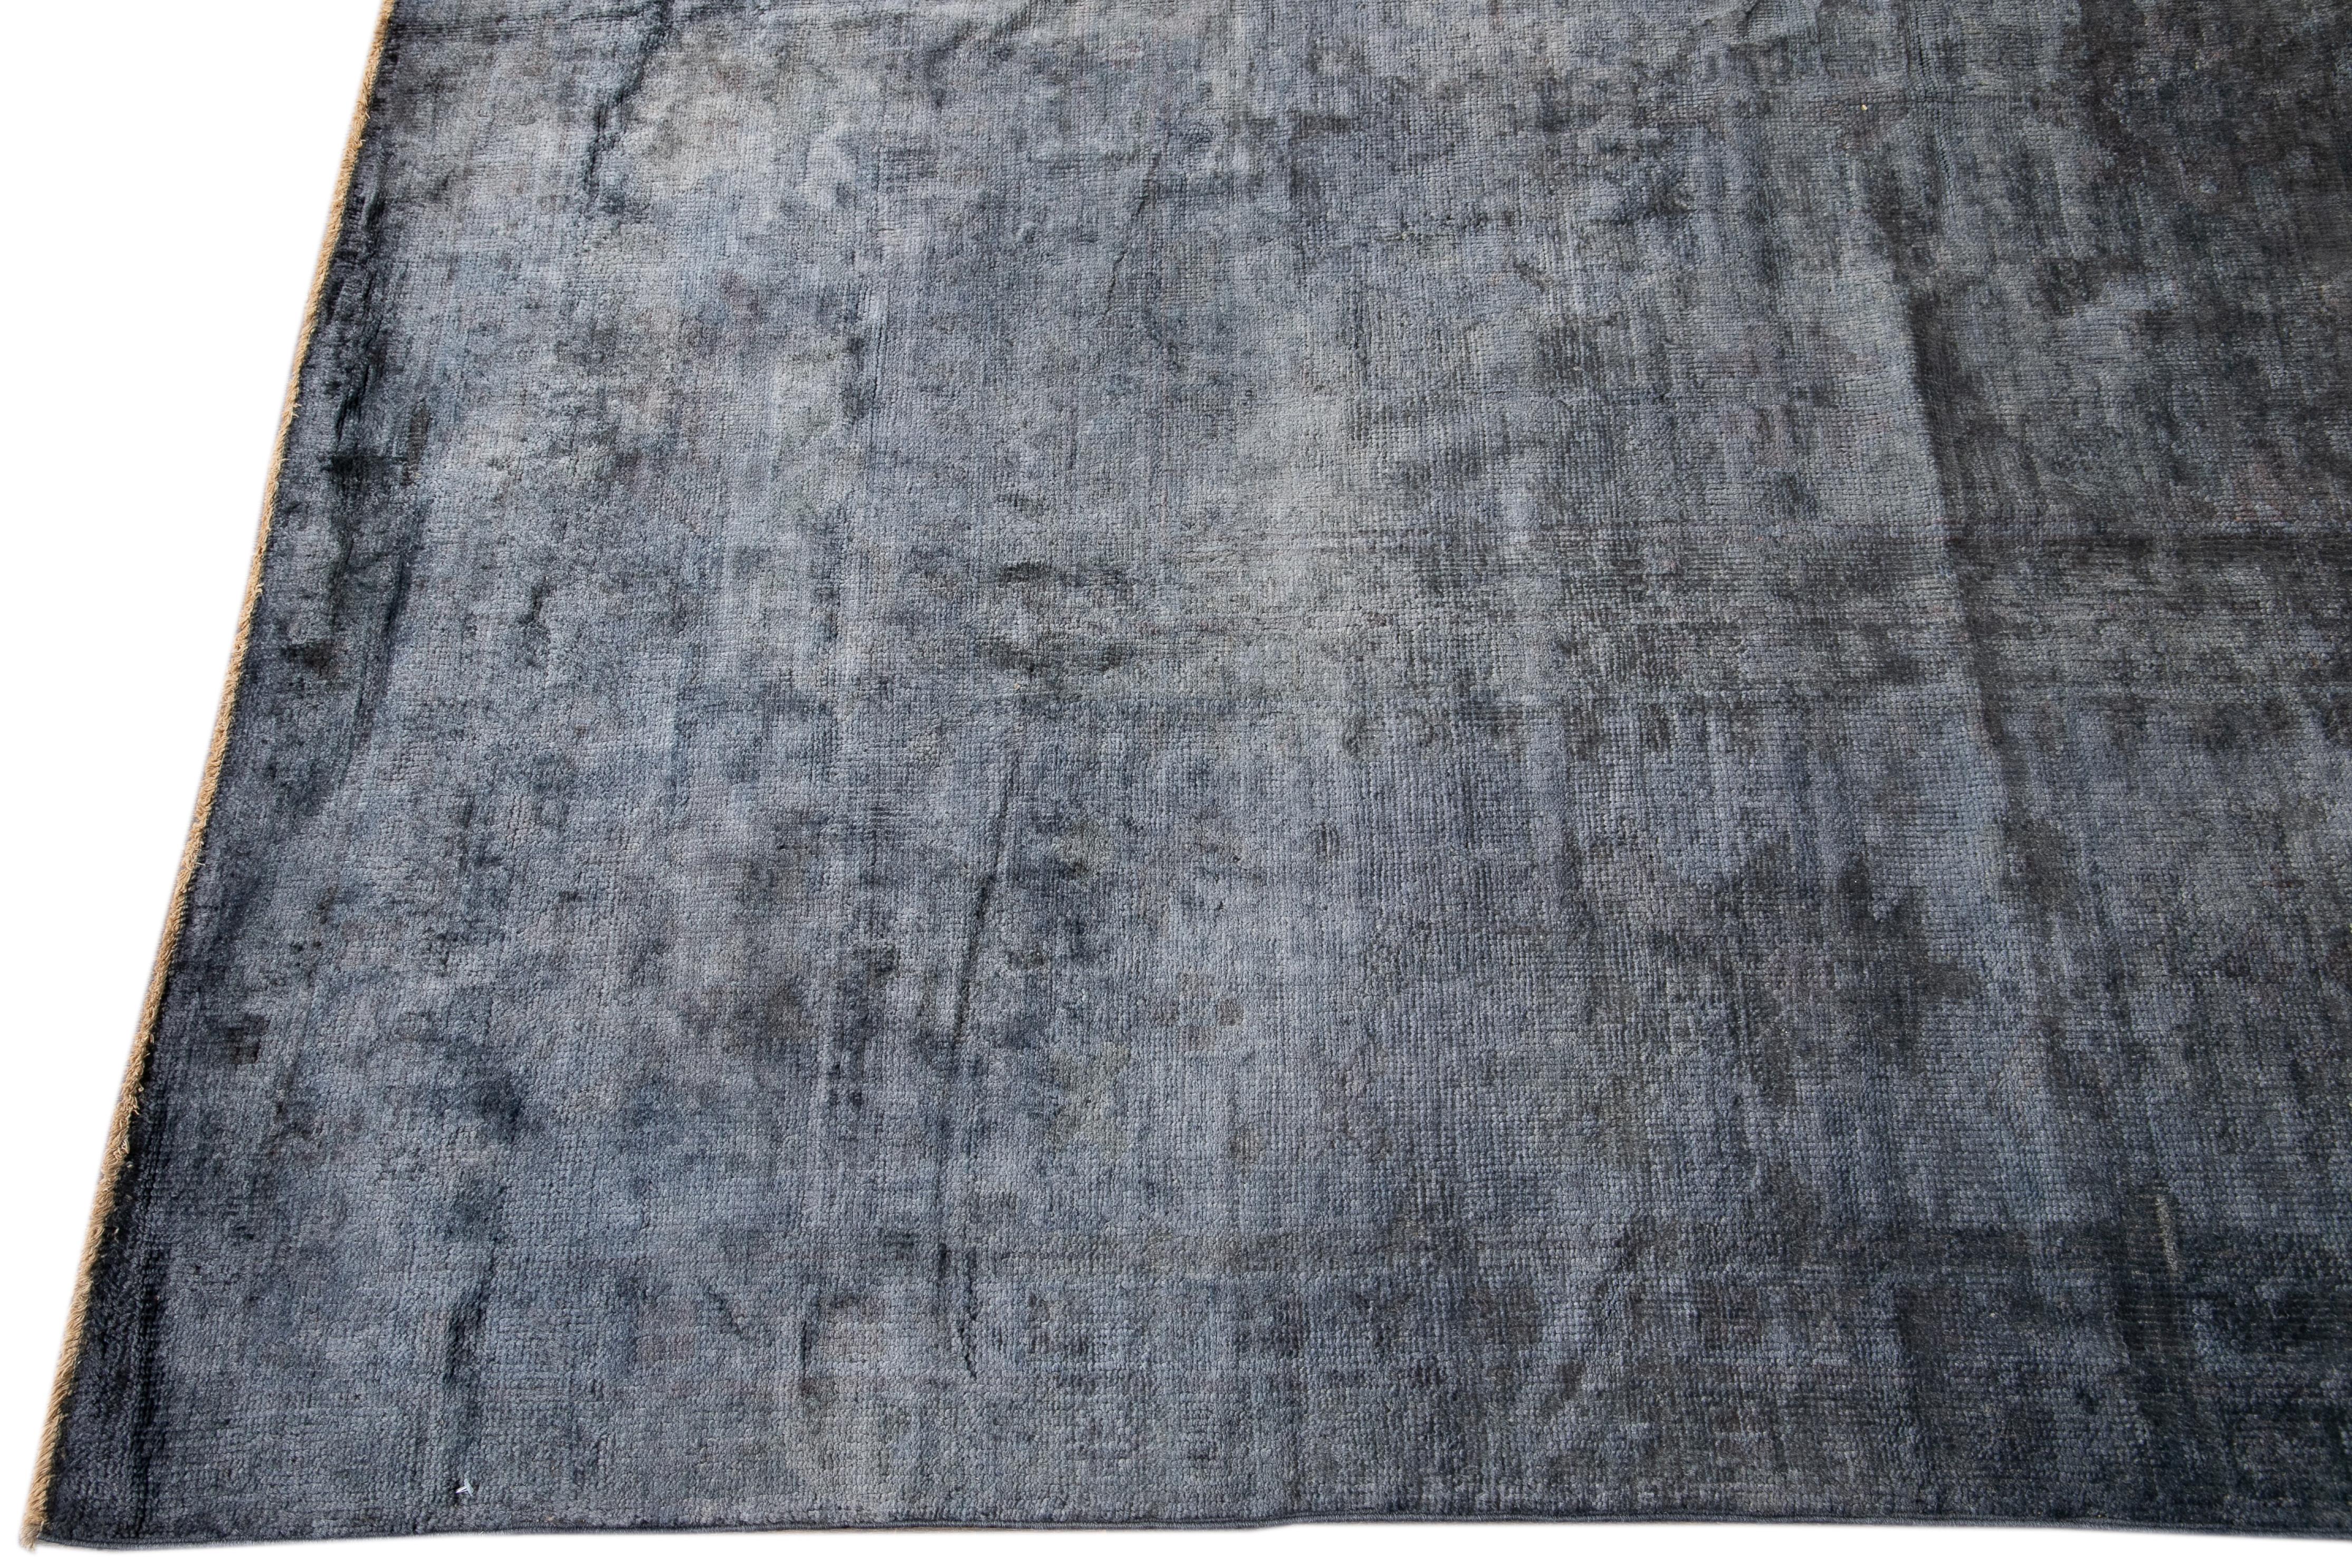 Beautiful contemporary overdyed rug, hand knotted wool with a blue field, silver accents, and a subtle center medallion design.
This rug measures 13' 2